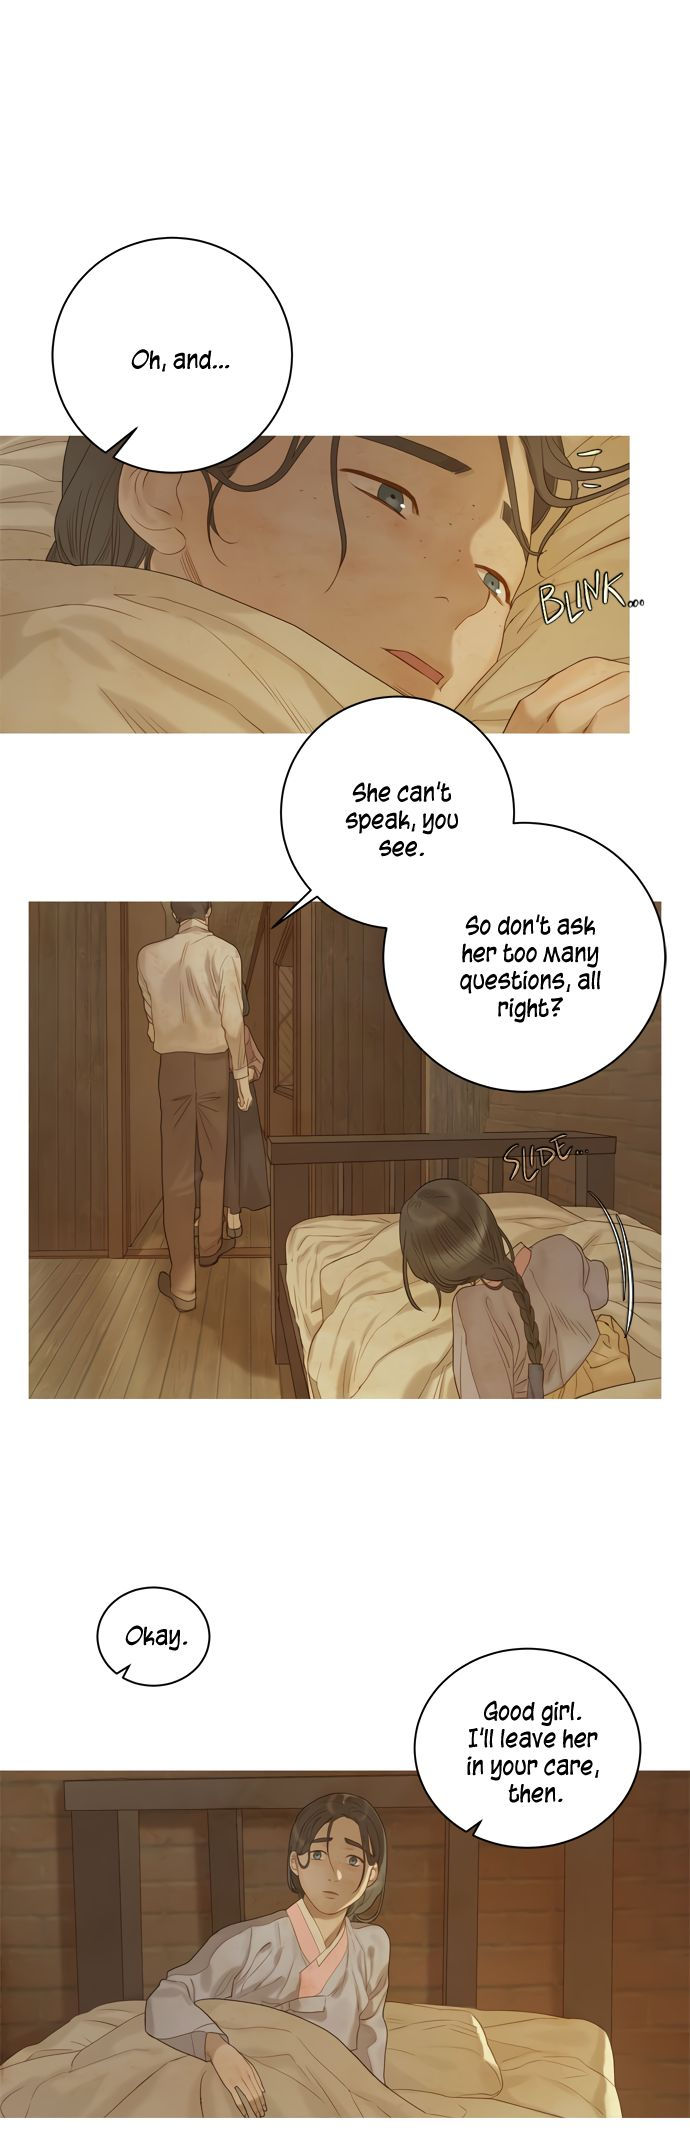 Gorae Byul - The Gyeongseong Mermaid - Chapter 20 Page 8